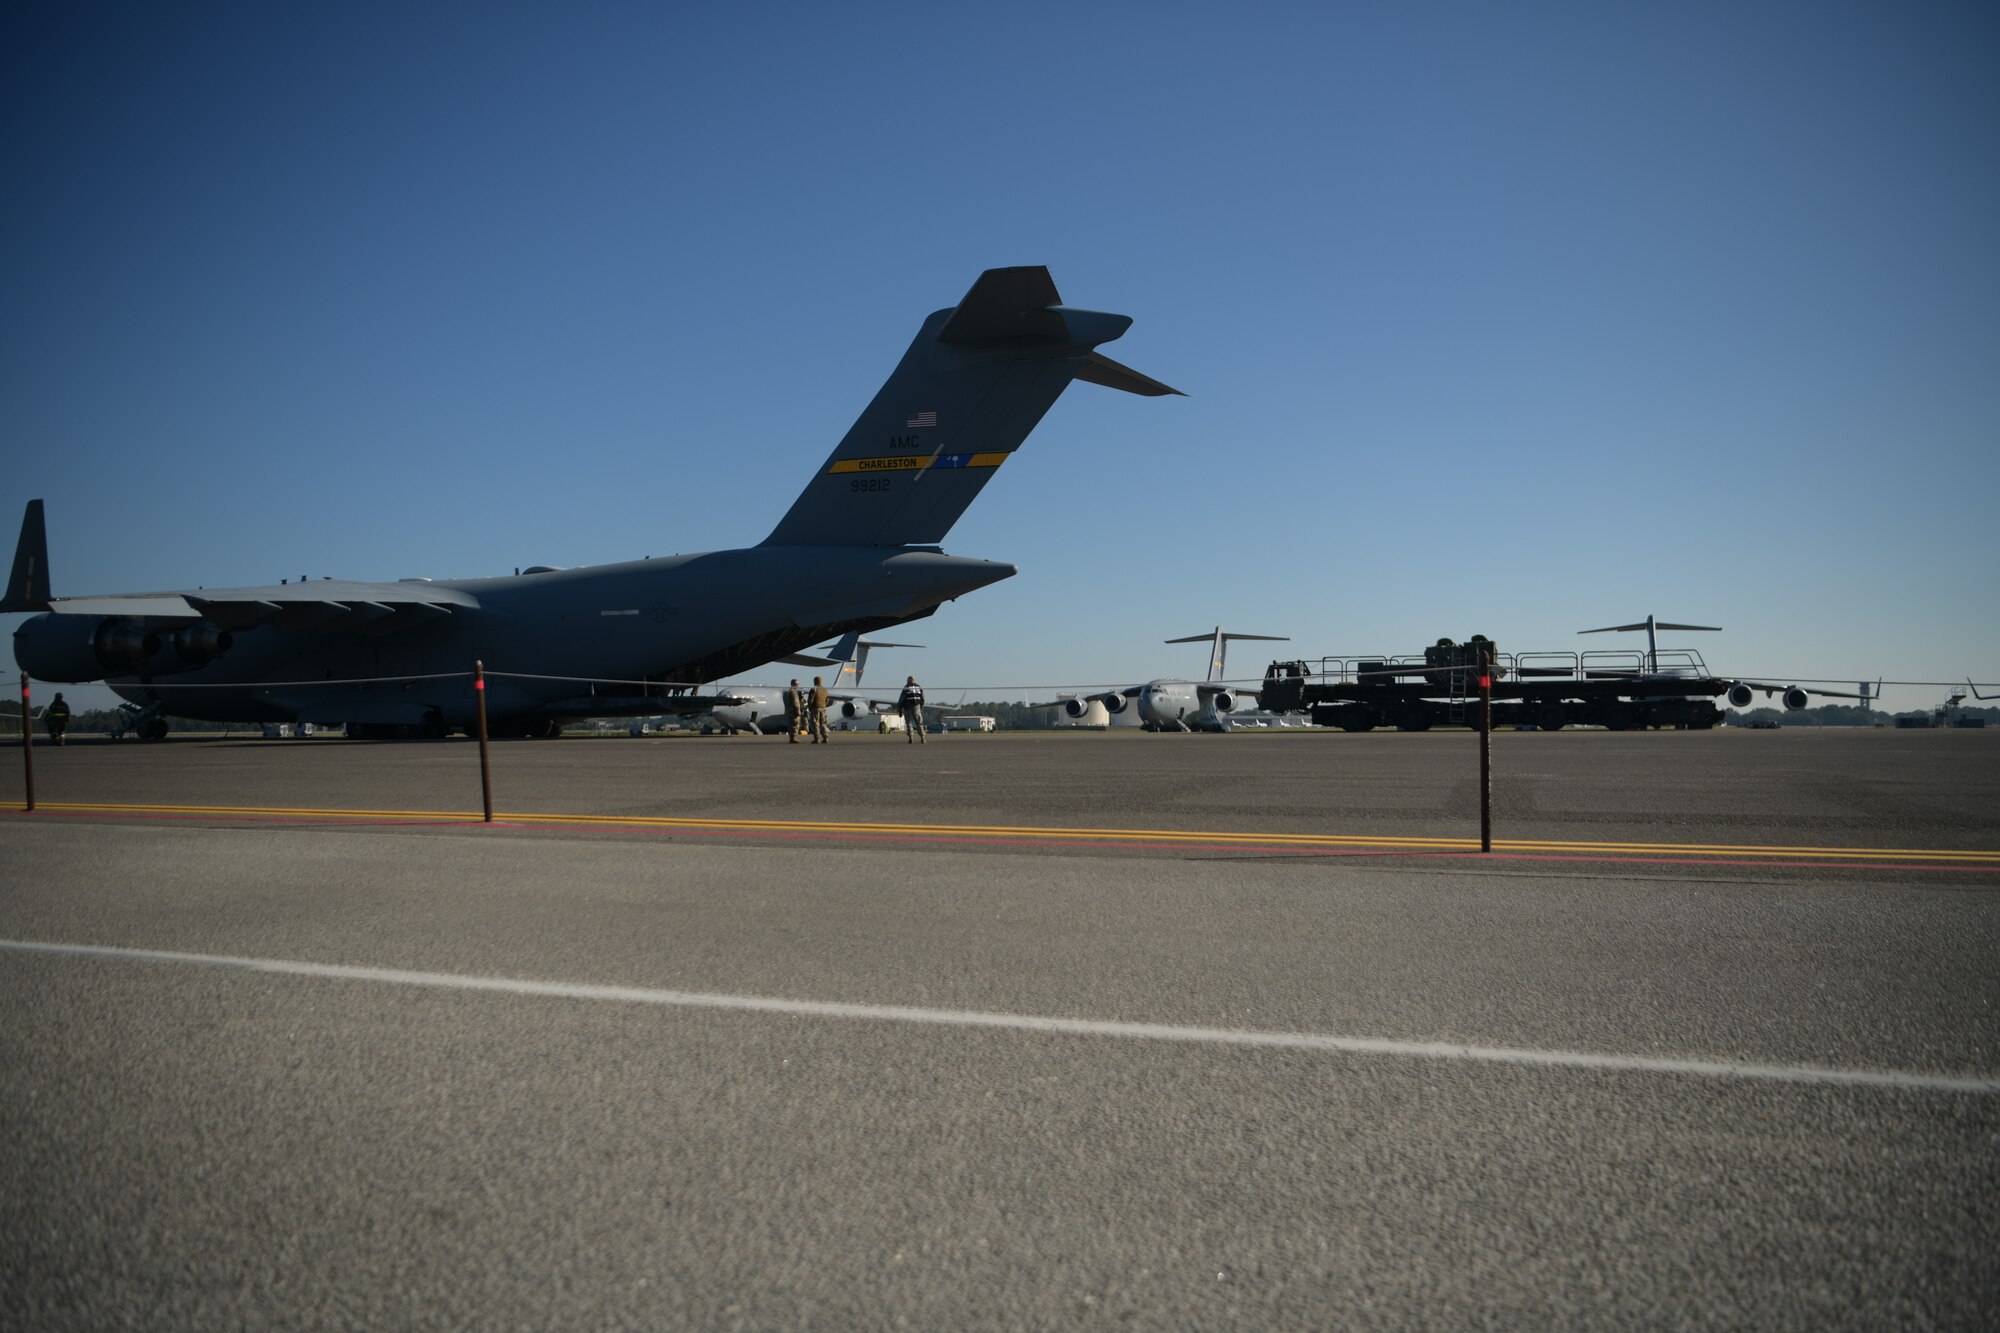 A C-17 Globemaster III is being loaded during a readiness exercise Nov. 16, 2018, at Joint Base Charleston, S.C. To keep the training as realistic as possible, participants from across JB Charleston received the equipment, weapons and specialty uniform items they would use in real-world situations. The simulated scenarios enabled senior base leaders and subject matter experts to ensure the readiness of JB Charleston’s quick response capabilities and analyze ways to maximize efficiency.